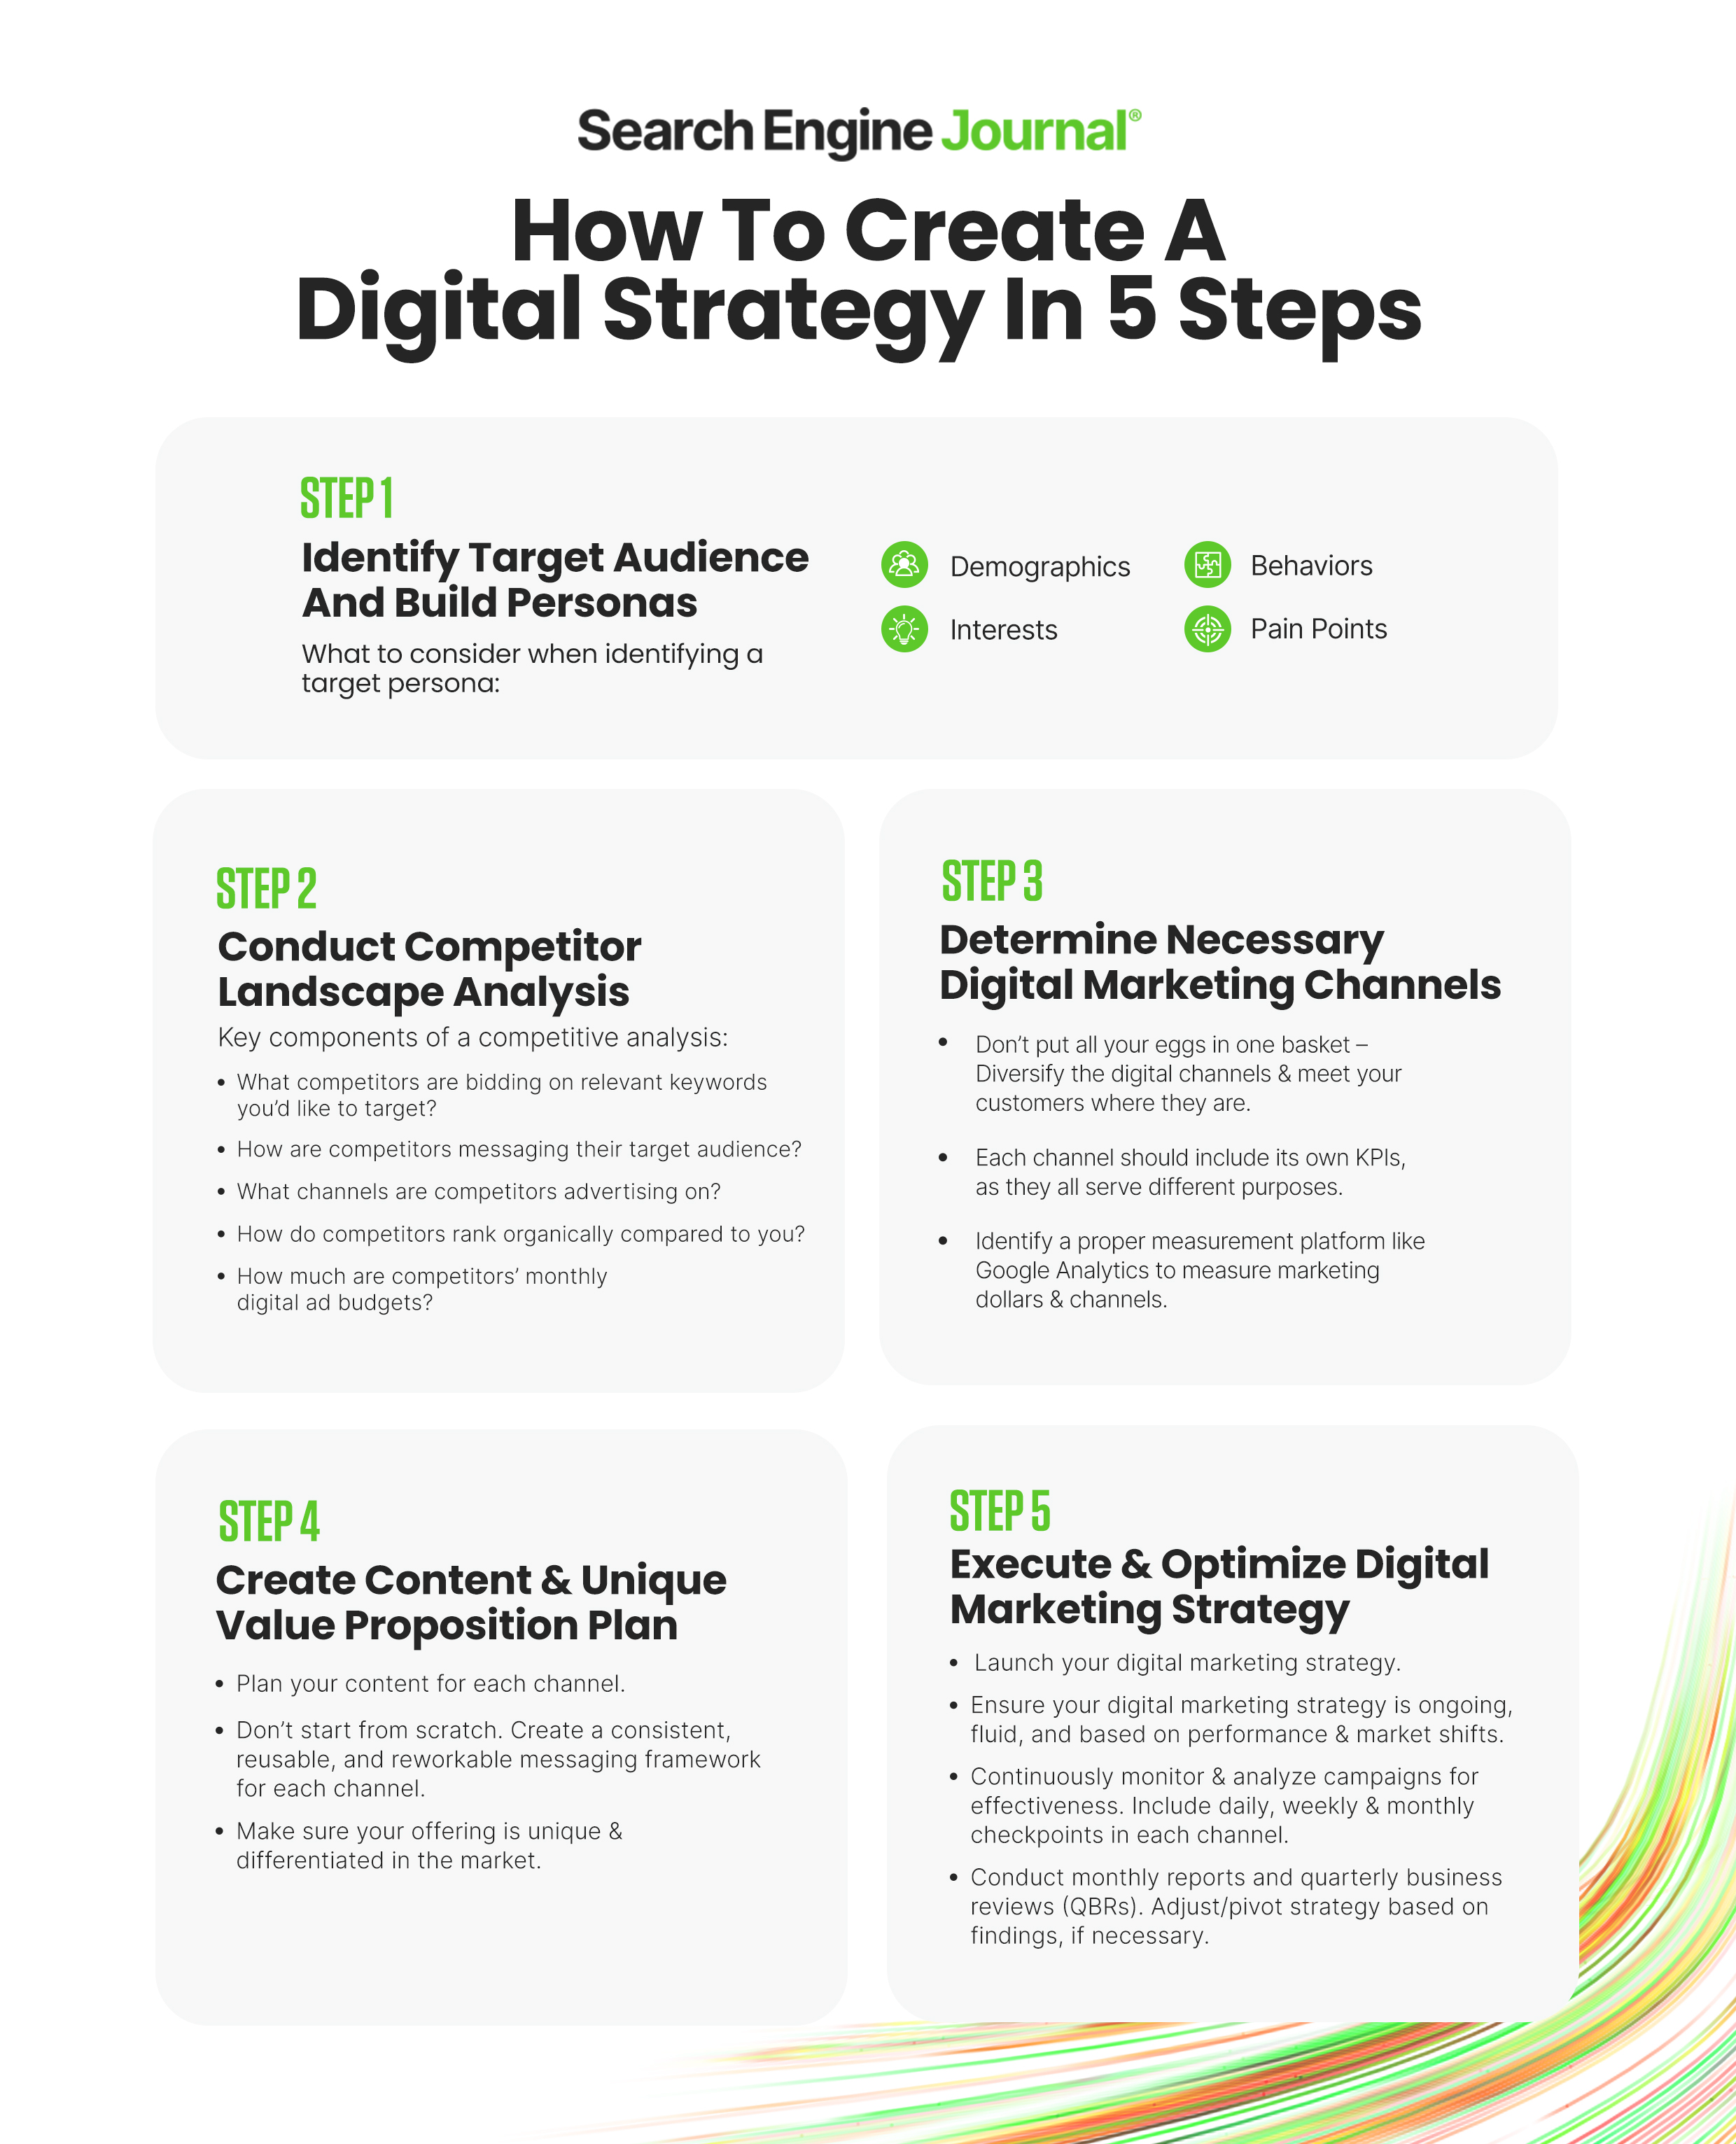 What Is A Digital Marketing Strategy? 5 Steps To Create One